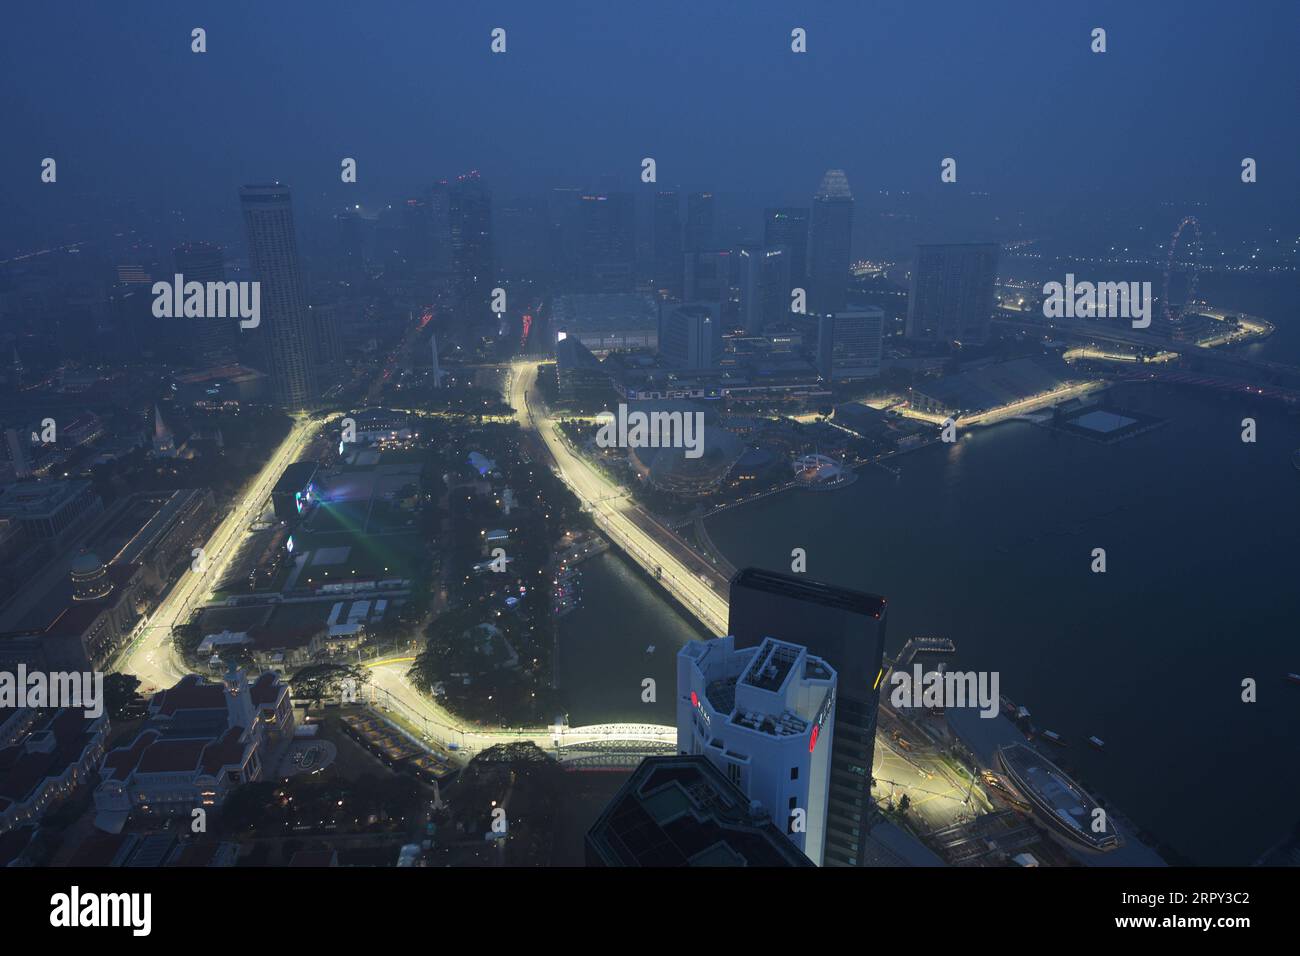 200612 -- SINGAPORE, June 12, 2020 Xinhua -- File photo taken on Sept. 18, 2019 shows a birds-eye view of the lighted up Marina Bay Street Circuit of the Singapore F1 Grand Prix Night Race in Singapore. Formula One F1 and race promoter Singapore GP on June 12, 2020 announced the 2020 Singapore F1 Grand Prix Night Race was cancelled. Xinhua/Then Chih Wey SPSINGAPORE-F1-SINGAPORE GRAND PRIX-CANCELLATION PUBLICATIONxNOTxINxCHN Stock Photo